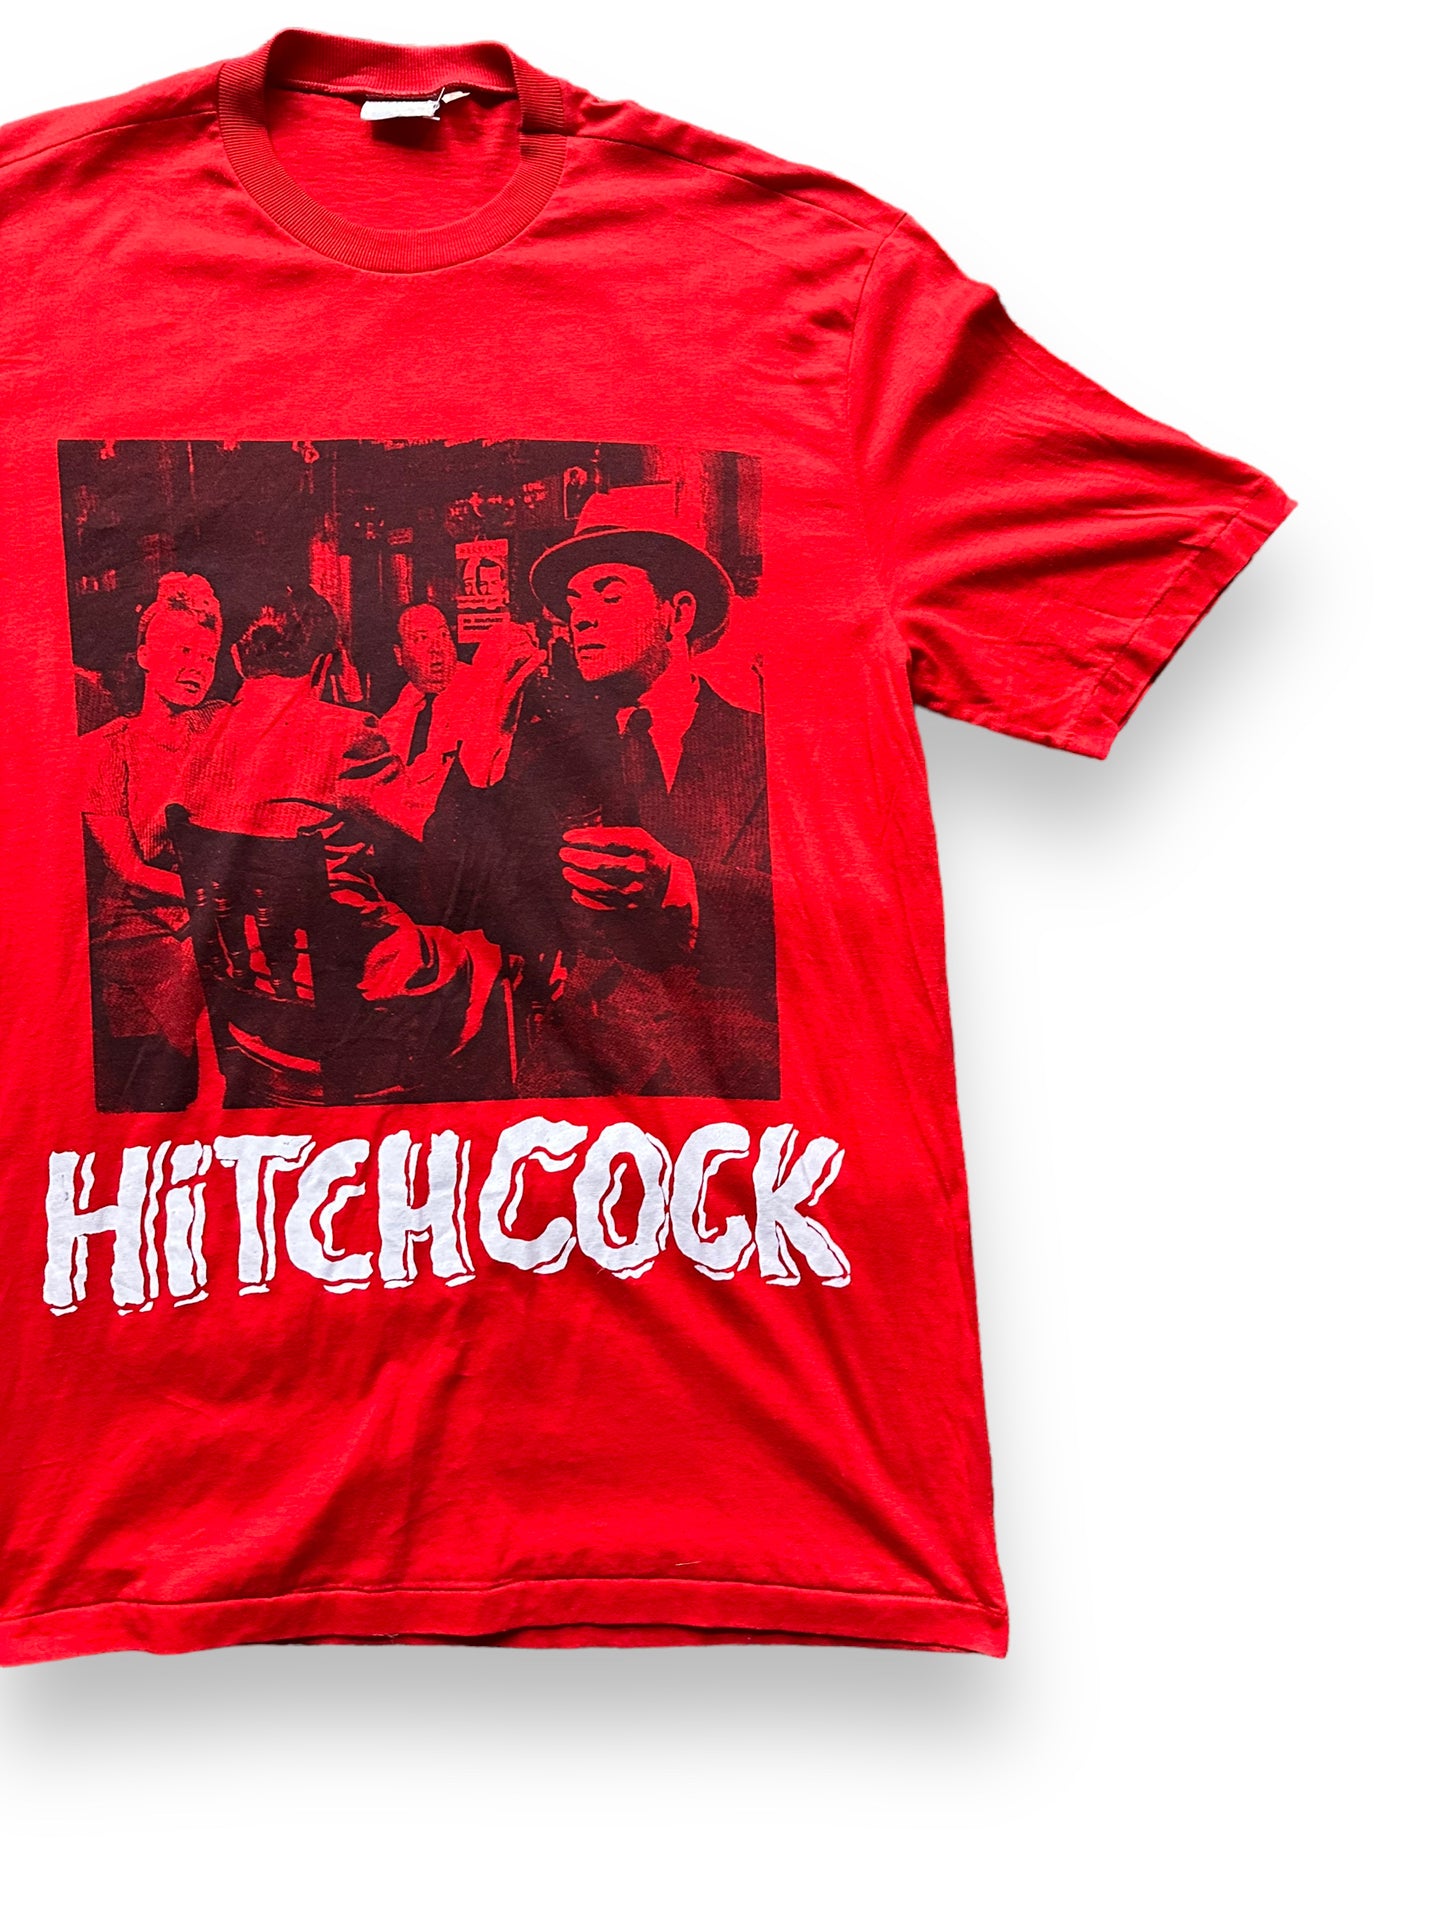 Front Left View of Vintage Alfred Hitchcock Tee SZ L | Vintage Hitchock T-Shirt Seattle | Barn Owl Vintage Tees Seattle